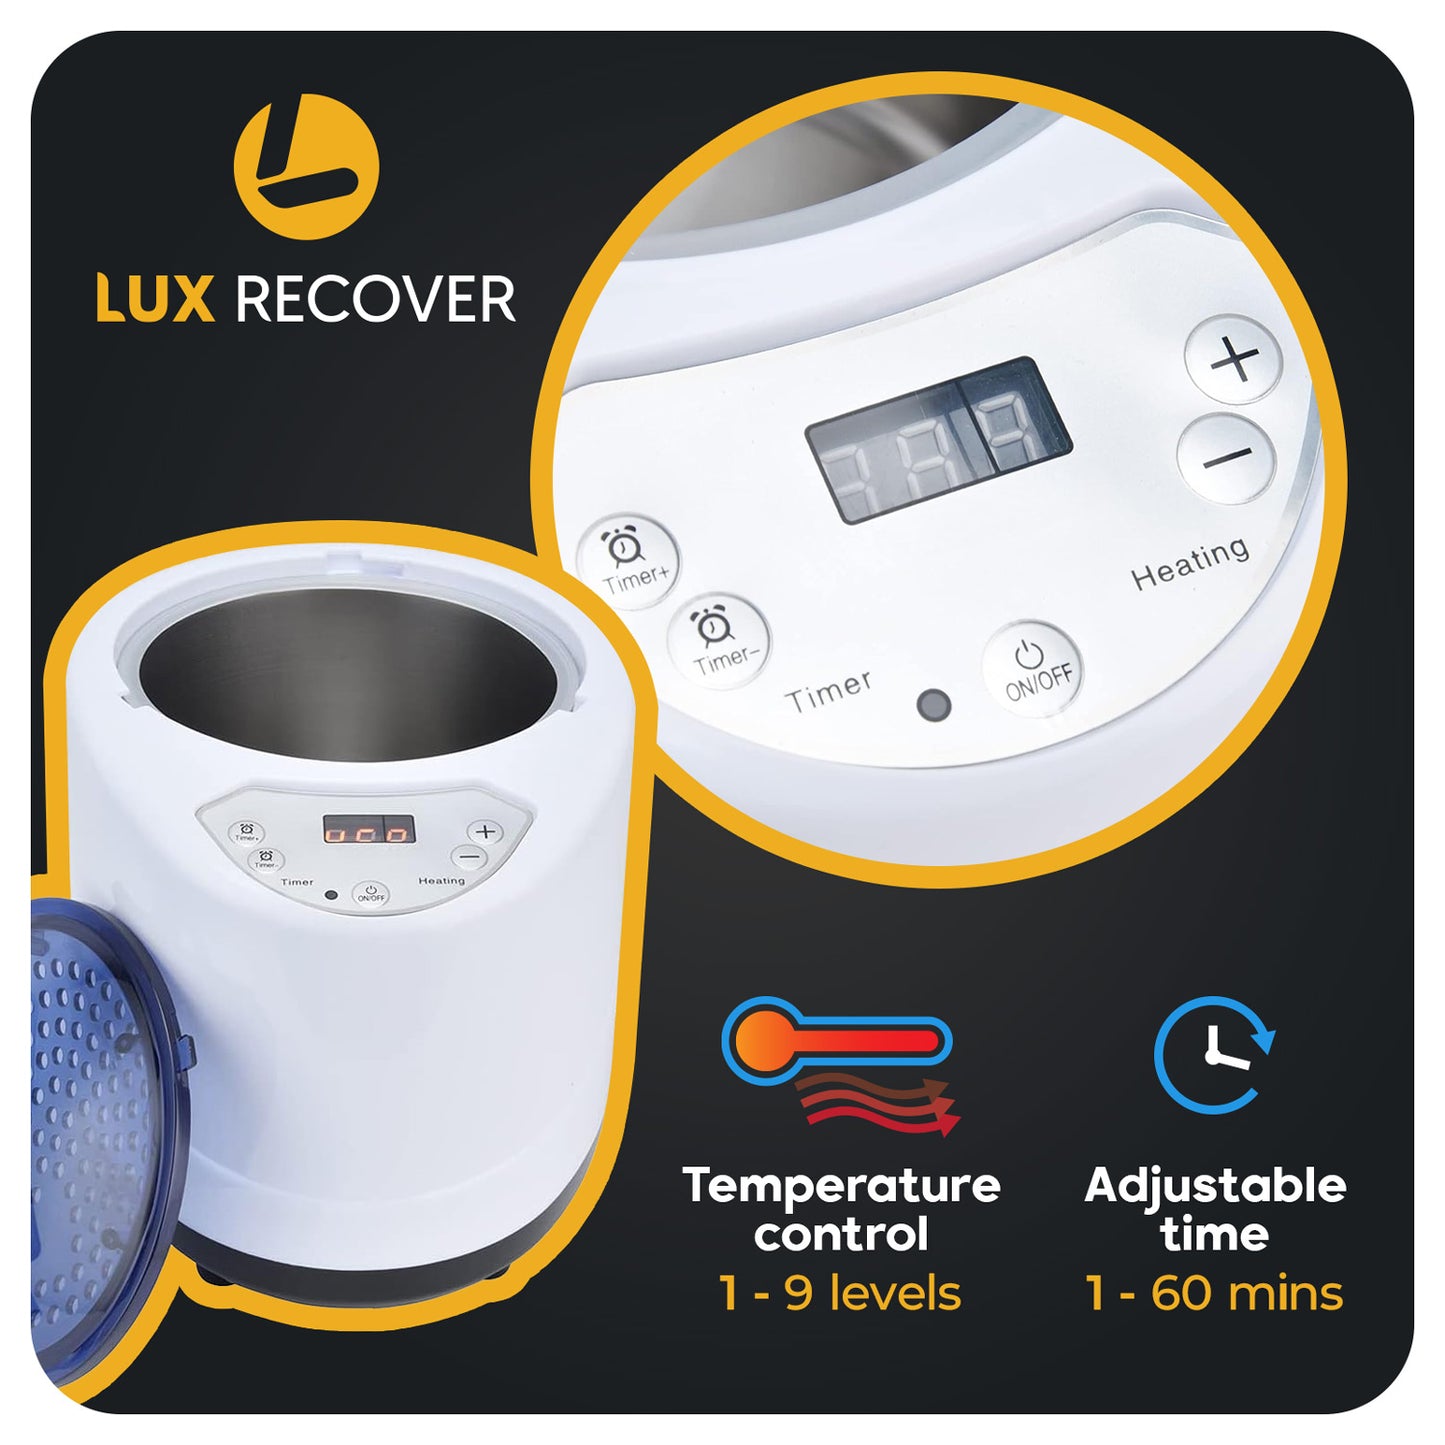 Lux Recover Portable Home Sauna - The Best Home Sauna in the UK